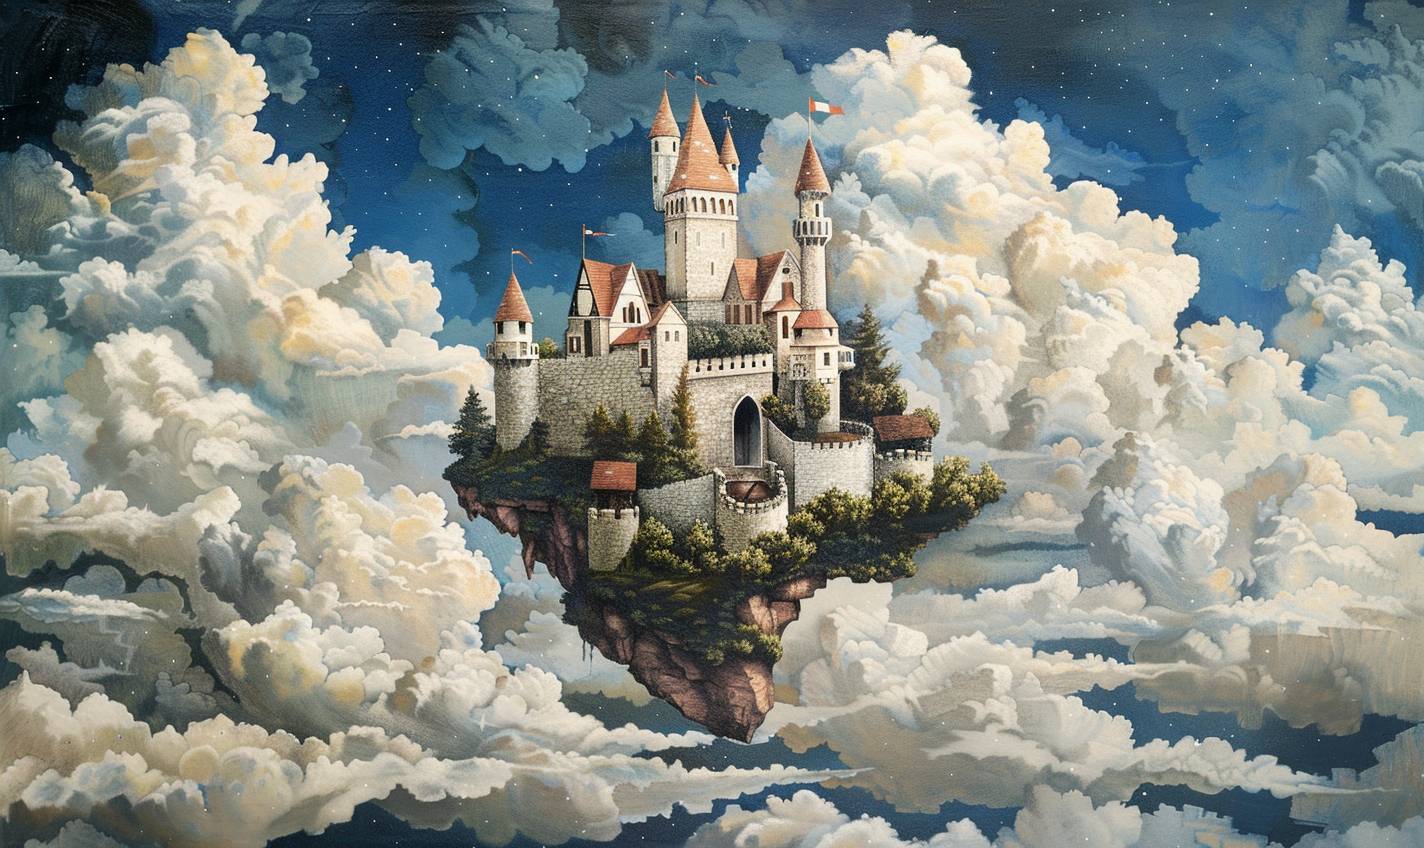 In the style of Grandma Moses, Fairy tale castle in the clouds